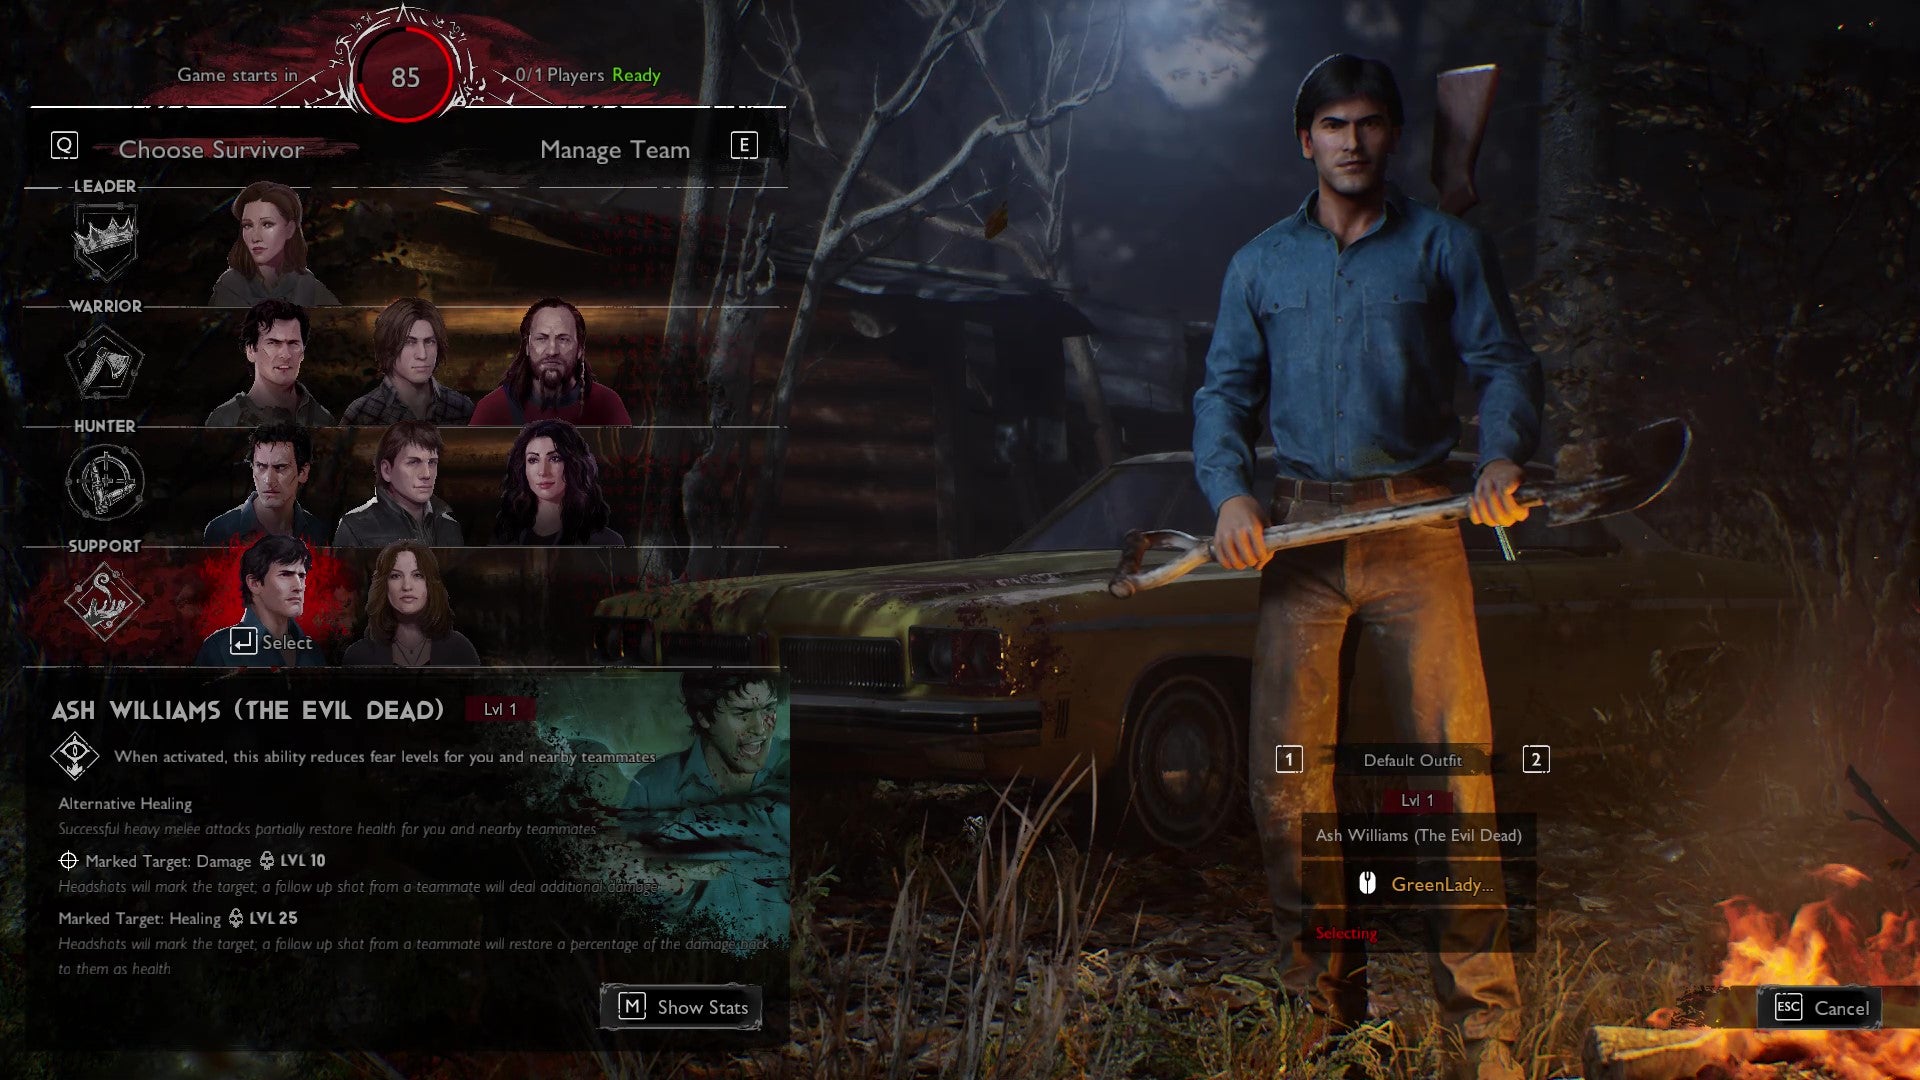 The player selection screen from Evil Dead: The Game, with Ash Williams (The Evil Dead) selected by a Survivor player.